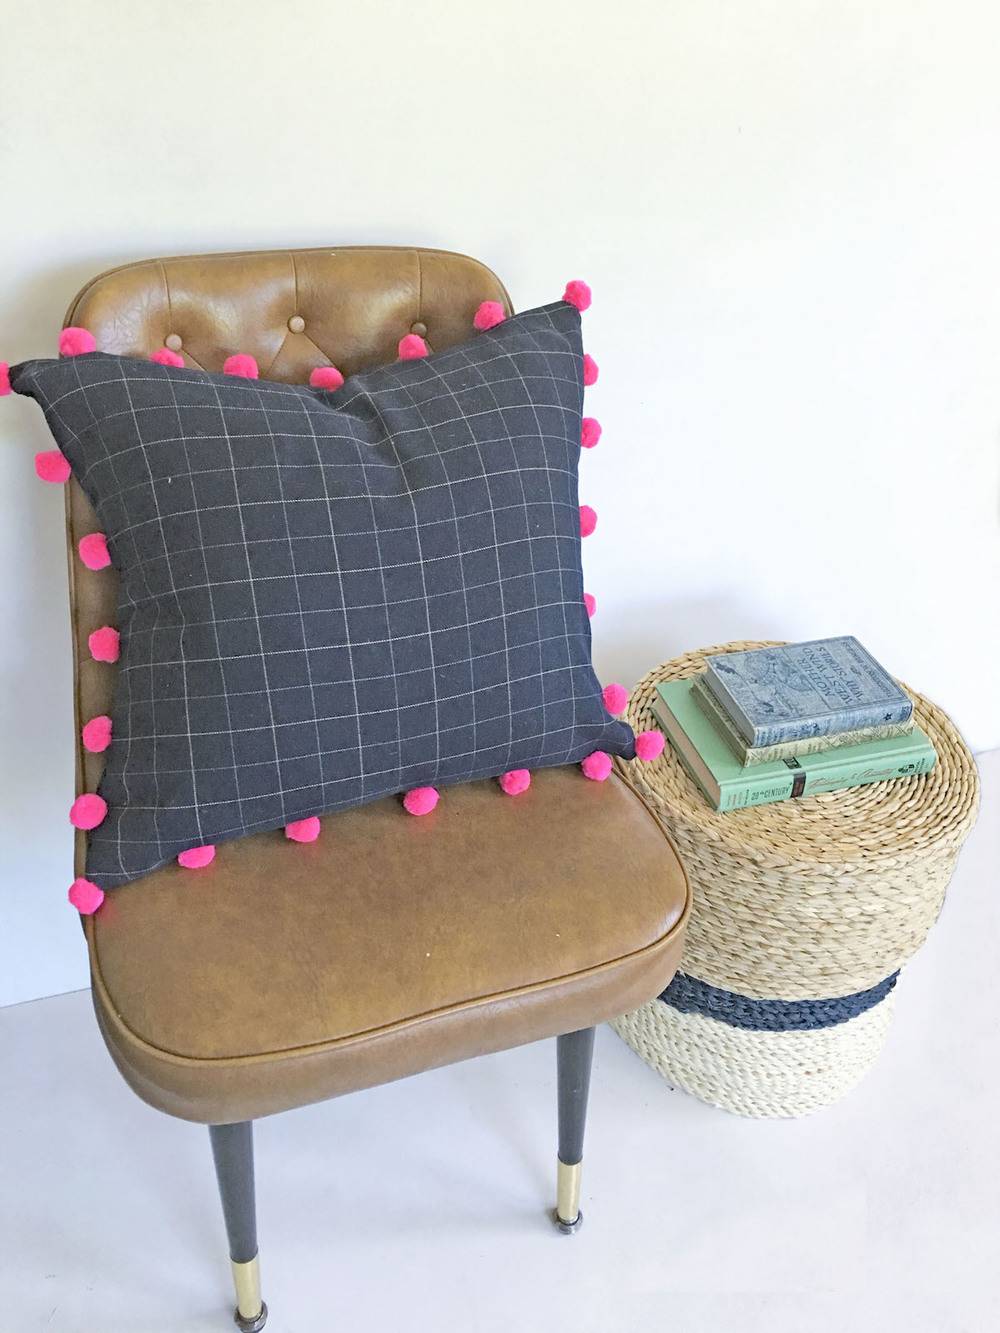 Make It: Pillow from Thrift Store Clothes